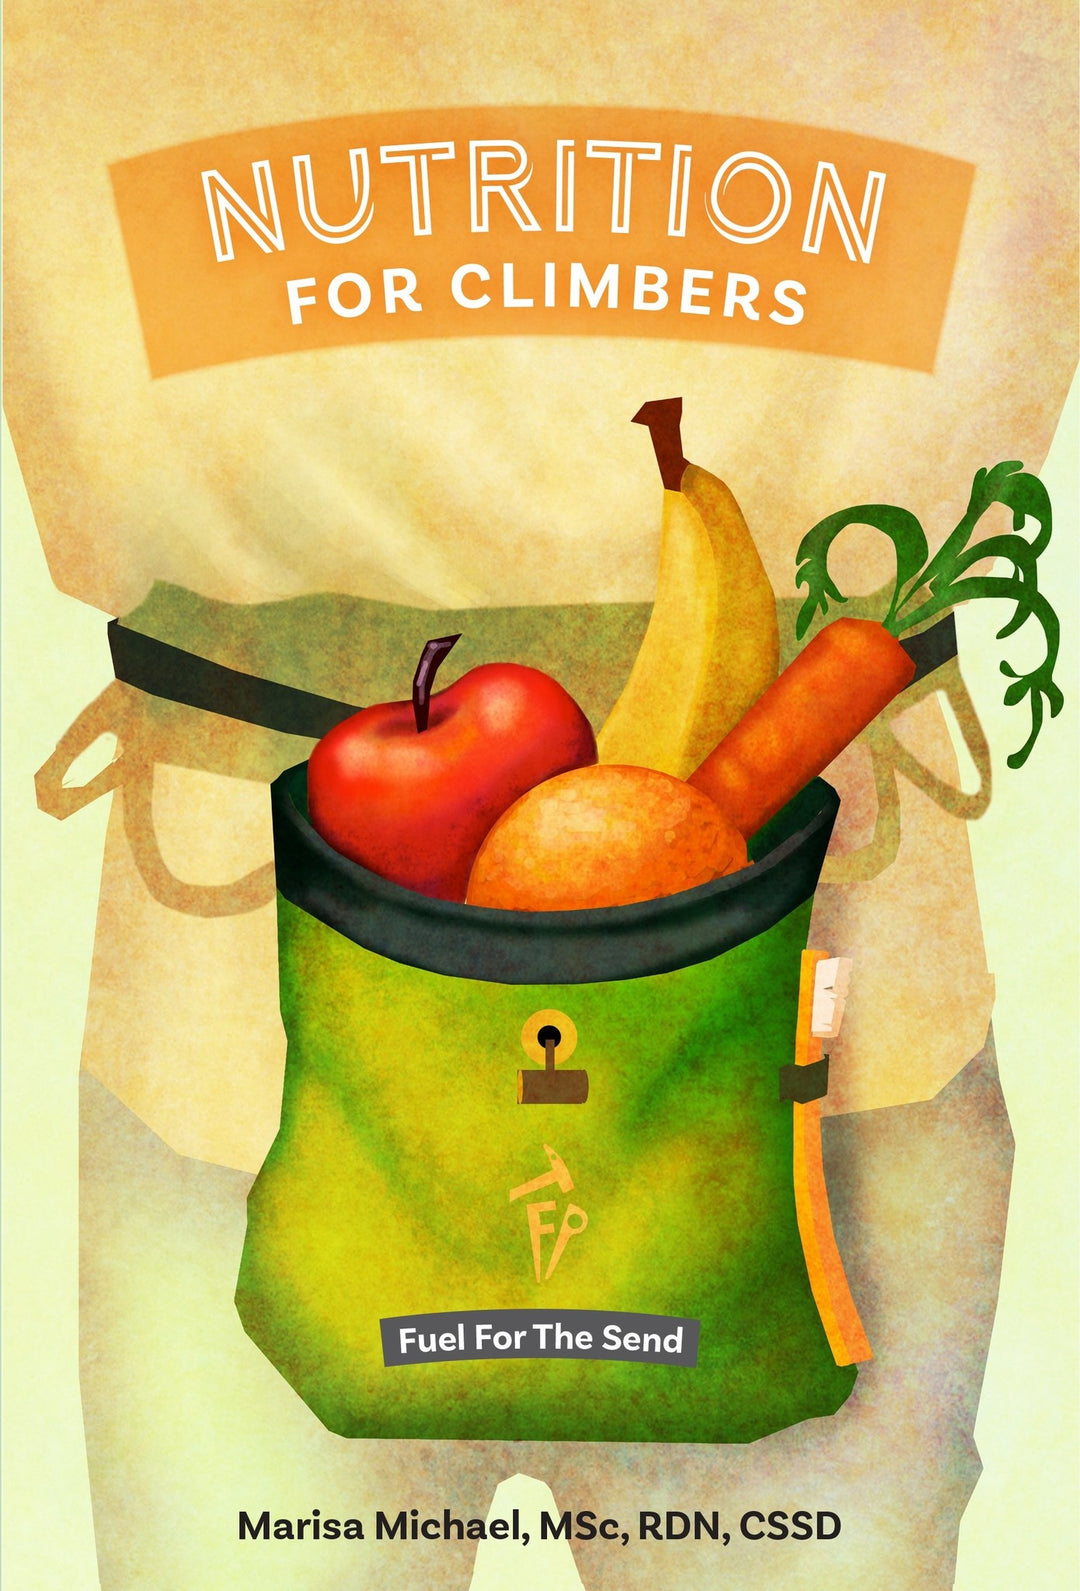 Nutrition for Climbers, Fuel for the Send